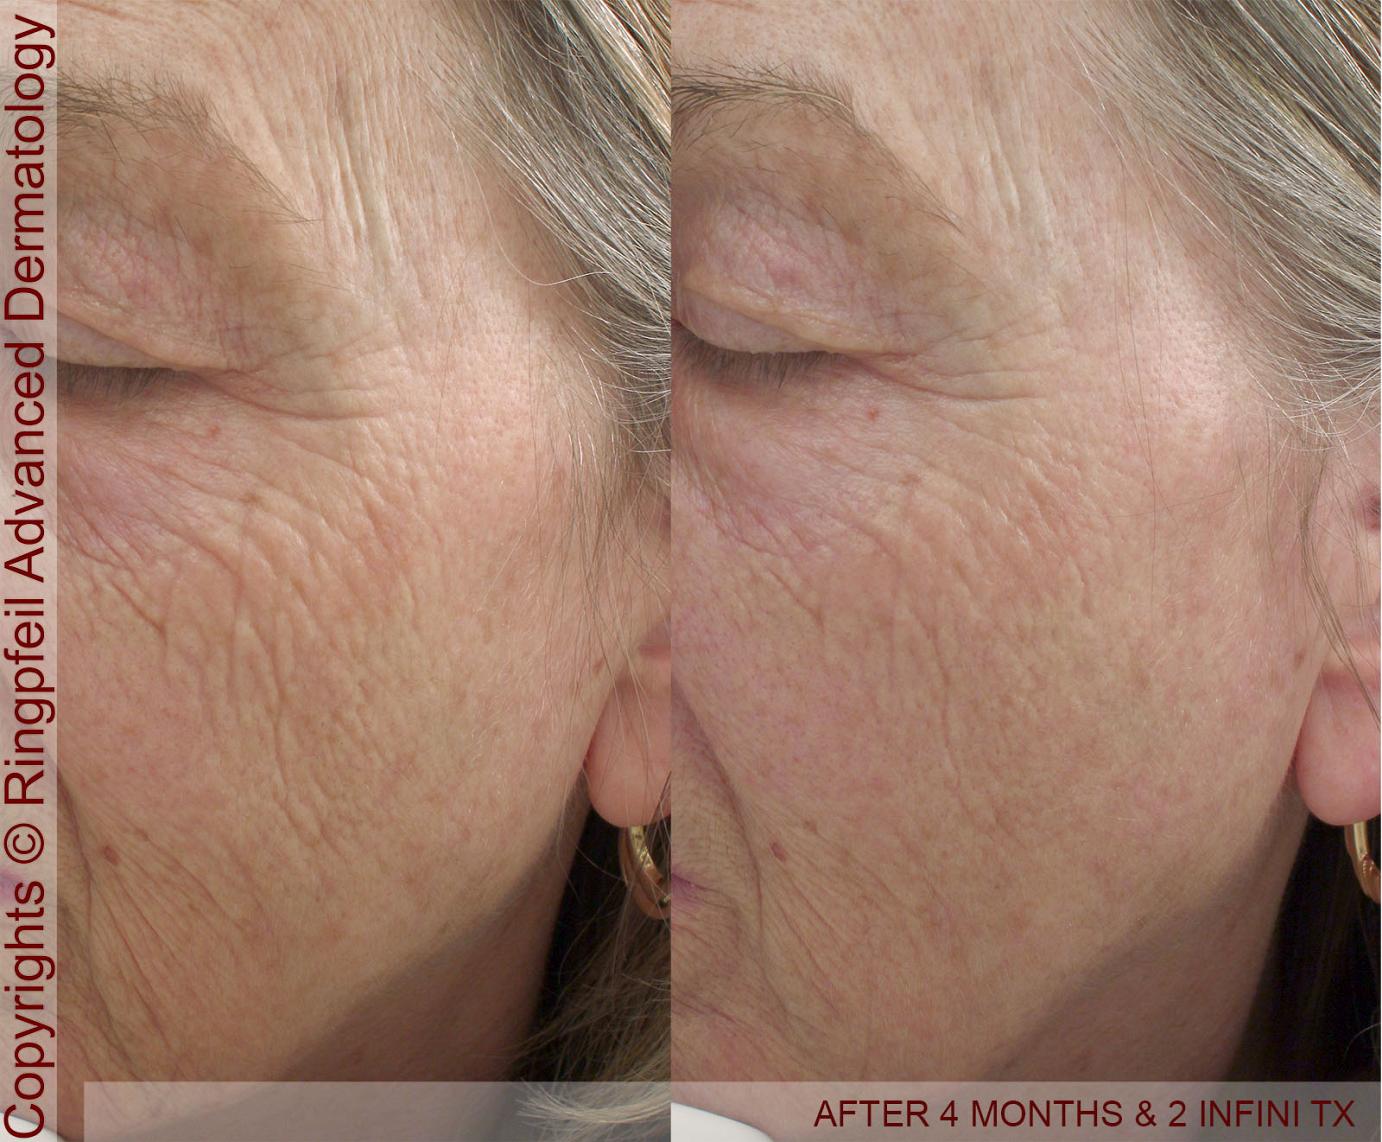 Facial skin tightening with Infini - after two treatmetns